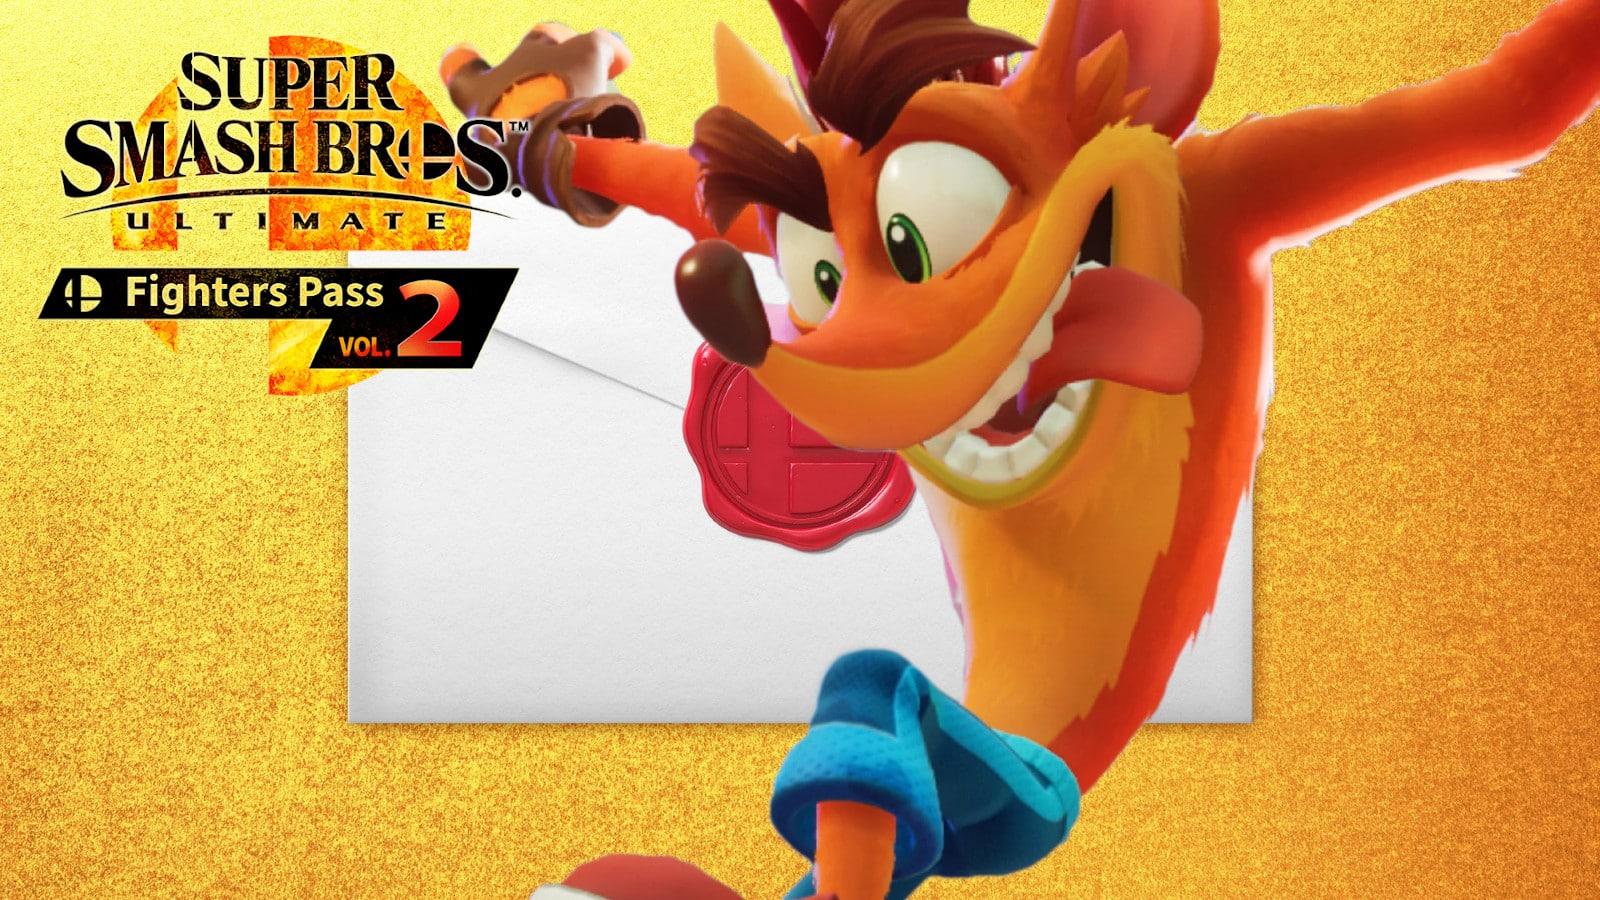 Here's Why Crash Bandicoot Could Be The New Smash Bros. DLC Fighter